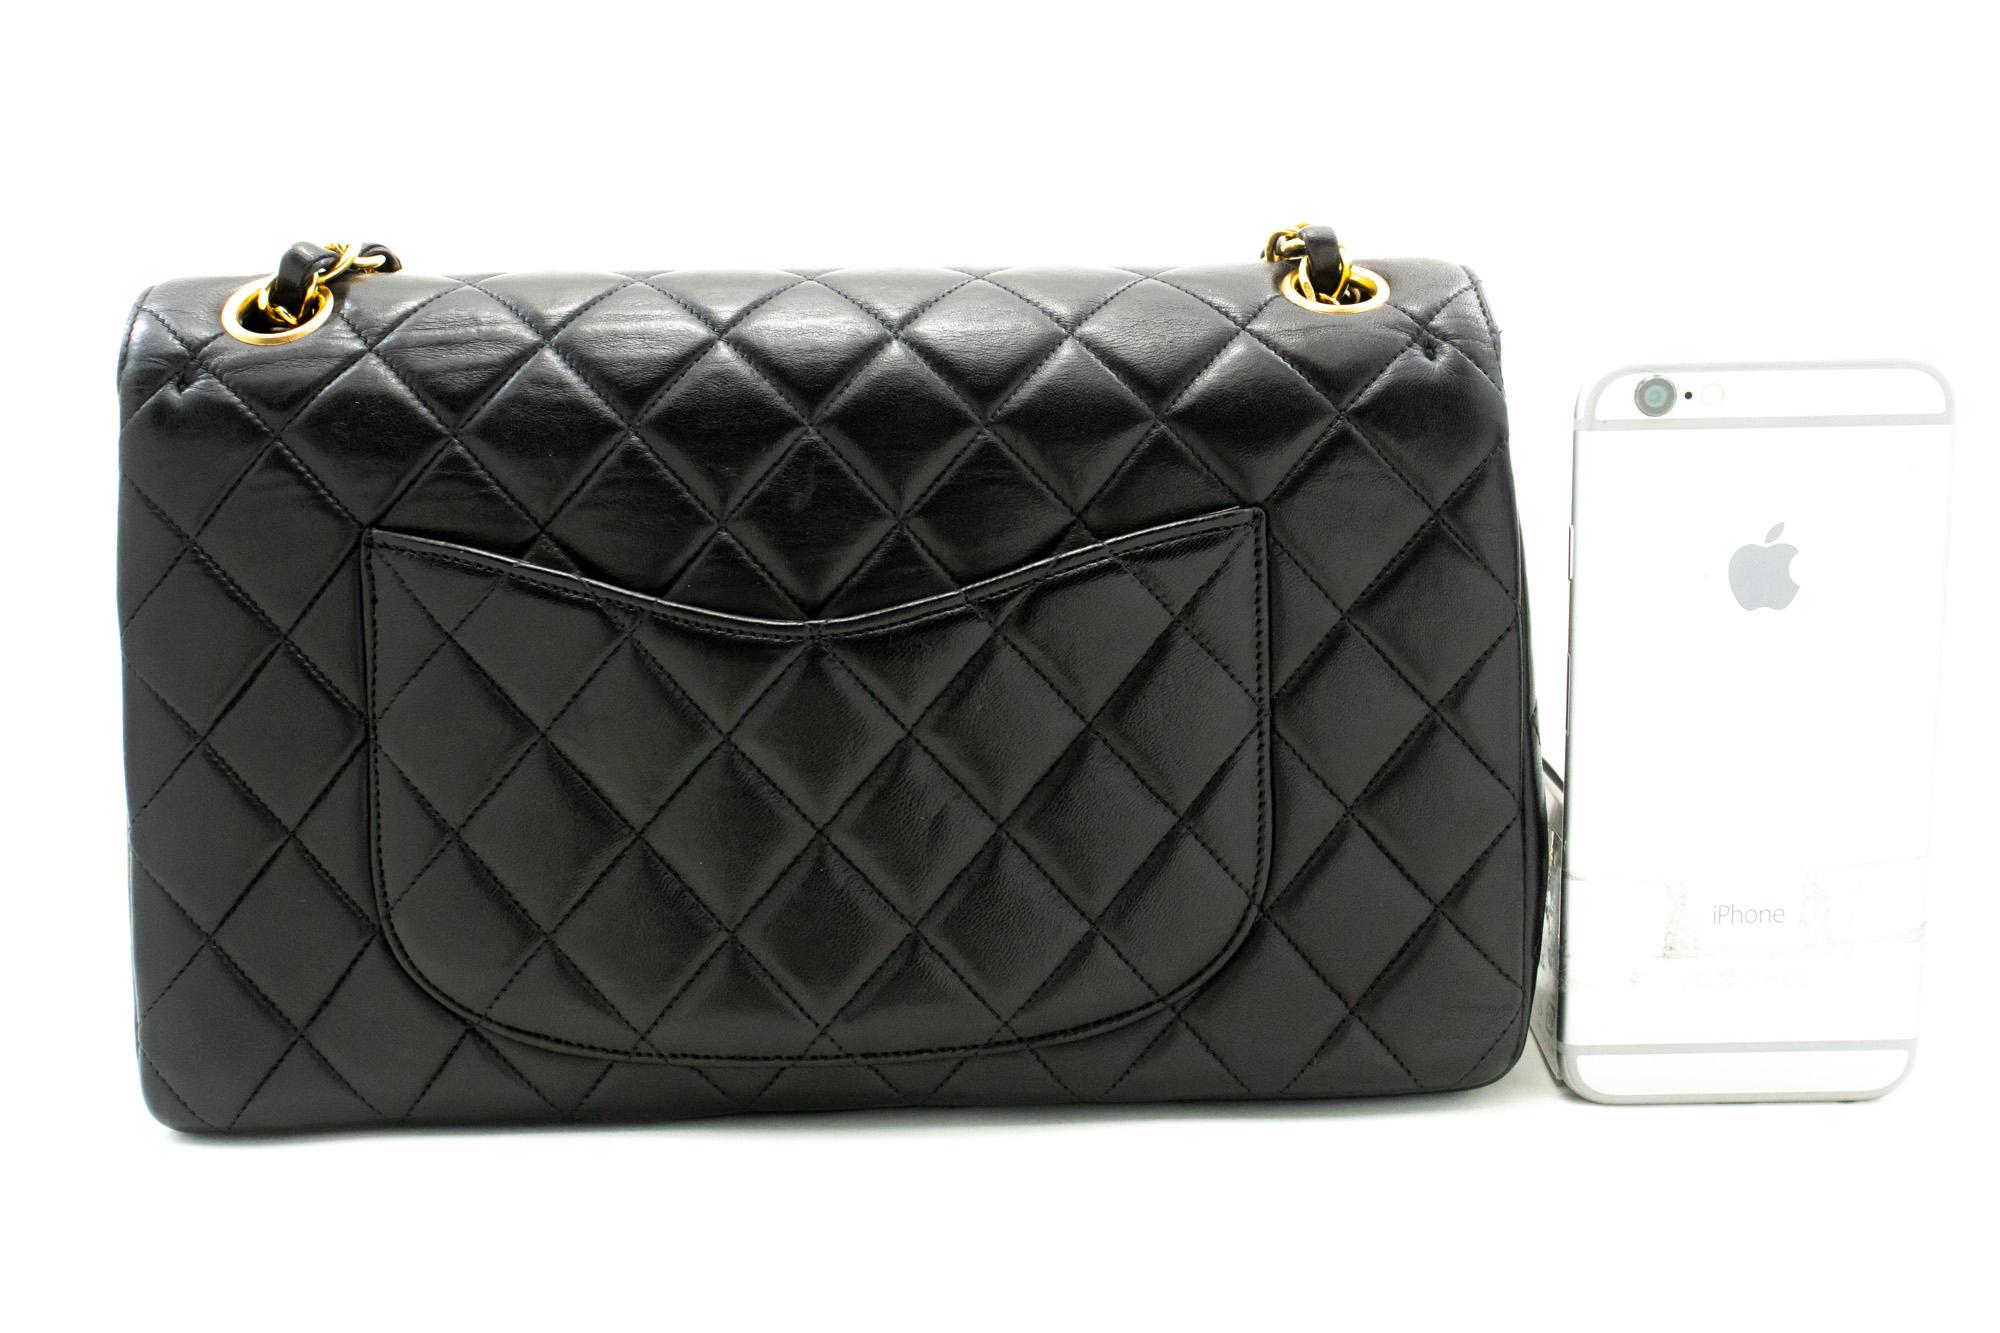 CHANEL Paris Limited Chain Shoulder Bag Black Double Flap Quilted In Good Condition For Sale In Takamatsu-shi, JP